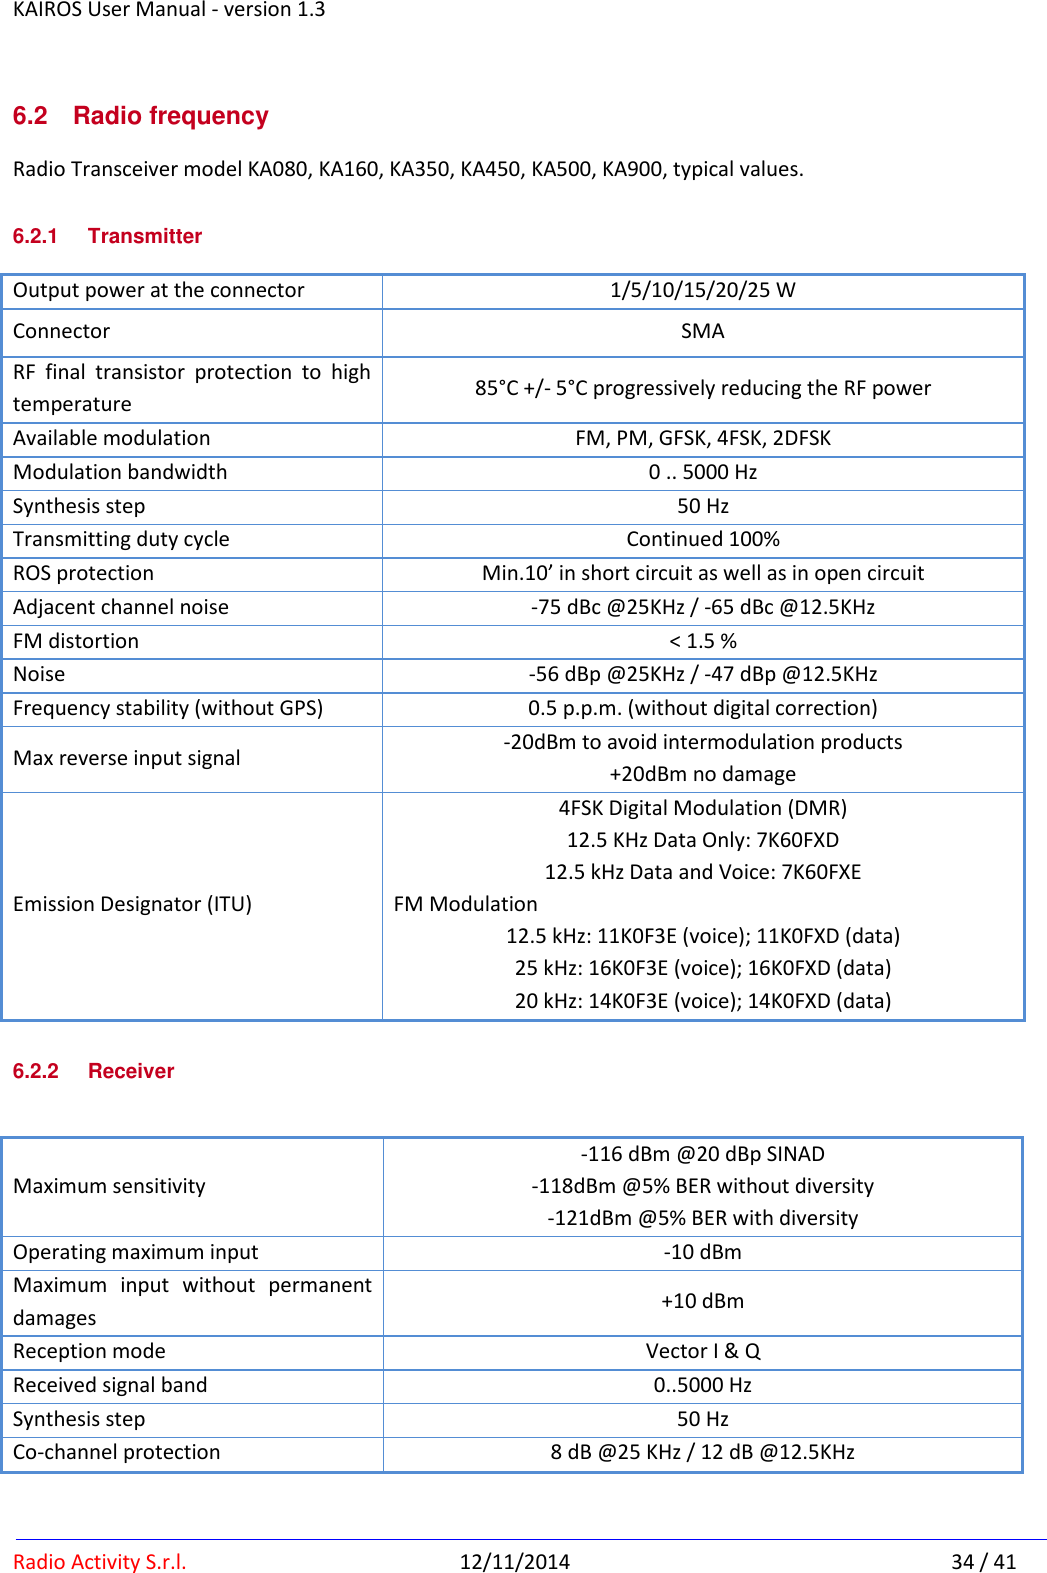 KAIROS User Manual - version 1.3   Radio Activity S.r.l.  12/11/2014  34 / 41 6.2  Radio frequency Radio Transceiver model KA080, KA160, KA350, KA450, KA500, KA900, typical values. 6.2.1  Transmitter Output power at the connector 1/5/10/15/20/25 W Connector  SMA RF  final  transistor  protection  to  high temperature  85°C +/- 5°C progressively reducing the RF power Available modulation FM, PM, GFSK, 4FSK, 2DFSK Modulation bandwidth 0 .. 5000 Hz Synthesis step 50 Hz Transmitting duty cycle Continued 100% ROS protection Min.10’ in short circuit as well as in open circuit Adjacent channel noise -75 dBc @25KHz / -65 dBc @12.5KHz FM distortion &lt; 1.5 % Noise -56 dBp @25KHz / -47 dBp @12.5KHz Frequency stability (without GPS) 0.5 p.p.m. (without digital correction) Max reverse input signal -20dBm to avoid intermodulation products +20dBm no damage Emission Designator (ITU) 4FSK Digital Modulation (DMR) 12.5 KHz Data Only: 7K60FXD 12.5 kHz Data and Voice: 7K60FXE FM Modulation 12.5 kHz: 11K0F3E (voice); 11K0FXD (data) 25 kHz: 16K0F3E (voice); 16K0FXD (data) 20 kHz: 14K0F3E (voice); 14K0FXD (data) 6.2.2  Receiver  Maximum sensitivity -116 dBm @20 dBp SINAD -118dBm @5% BER without diversity -121dBm @5% BER with diversity Operating maximum input -10 dBm Maximum  input  without  permanent damages  +10 dBm Reception mode Vector I &amp; Q Received signal band 0..5000 Hz Synthesis step 50 Hz Co-channel protection 8 dB @25 KHz / 12 dB @12.5KHz 